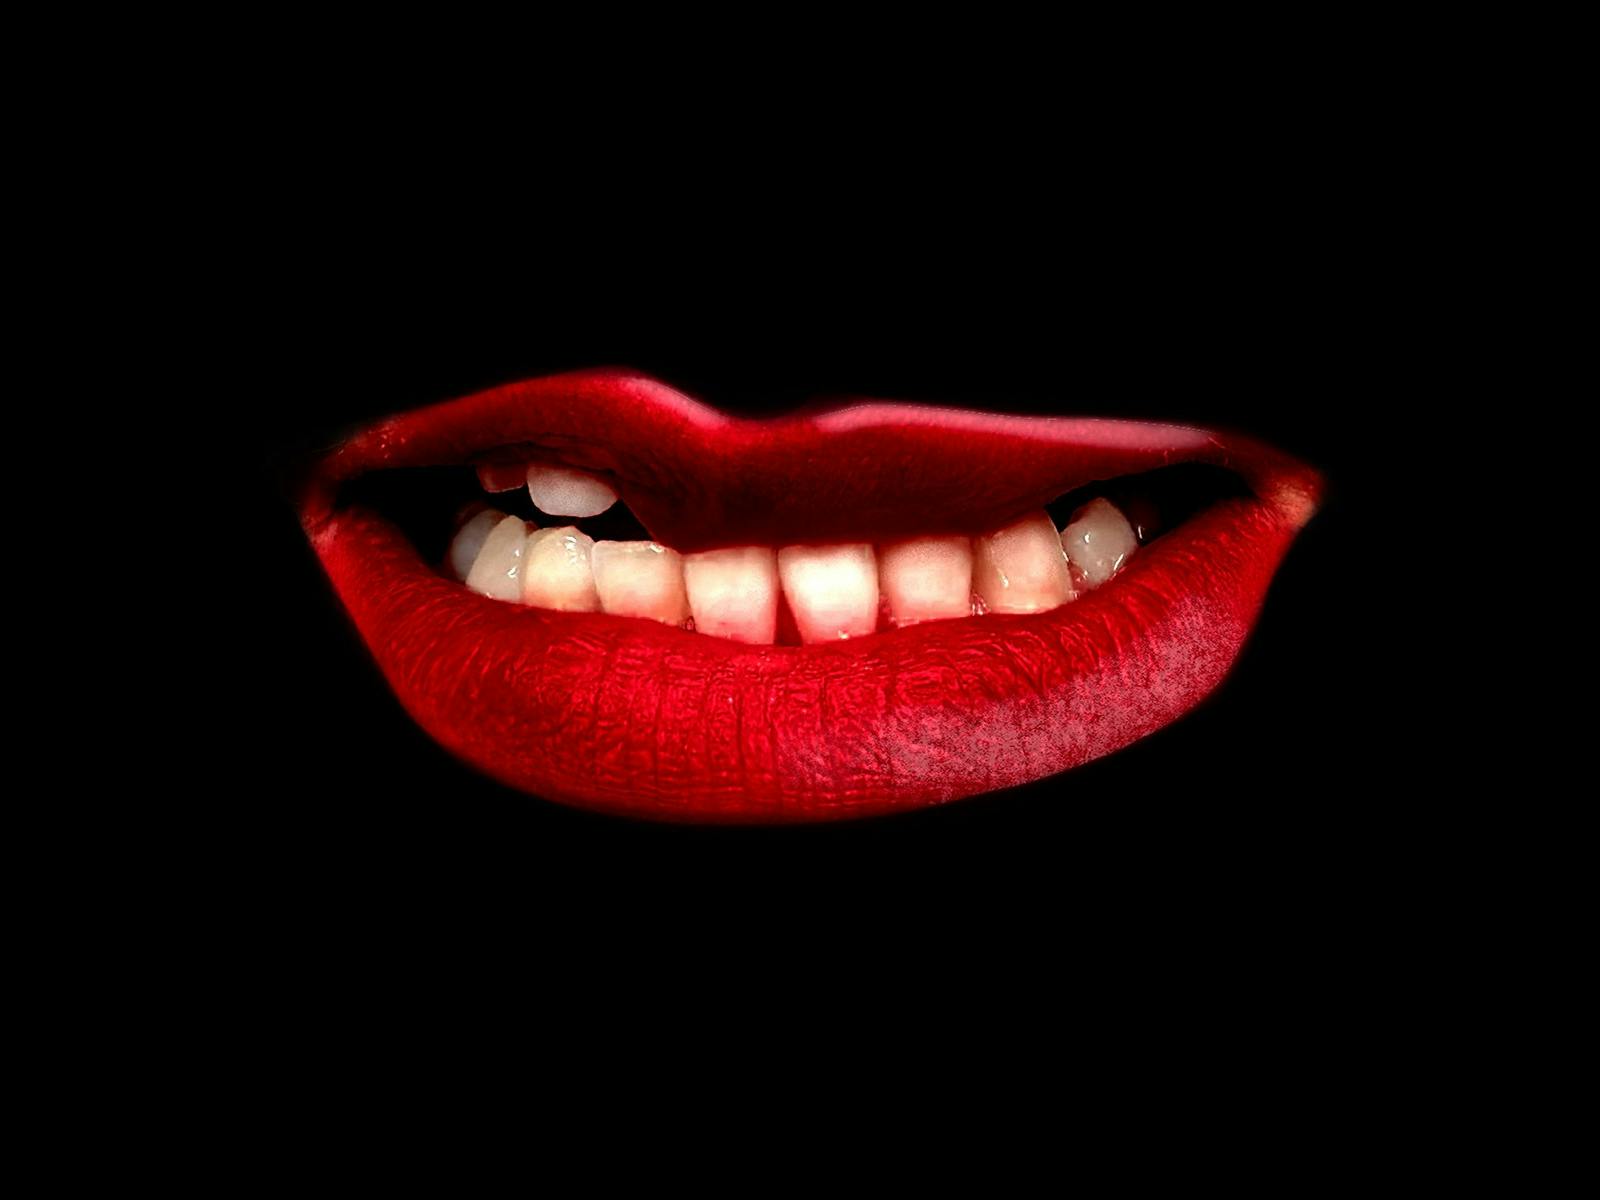 Bright red lips on a black background